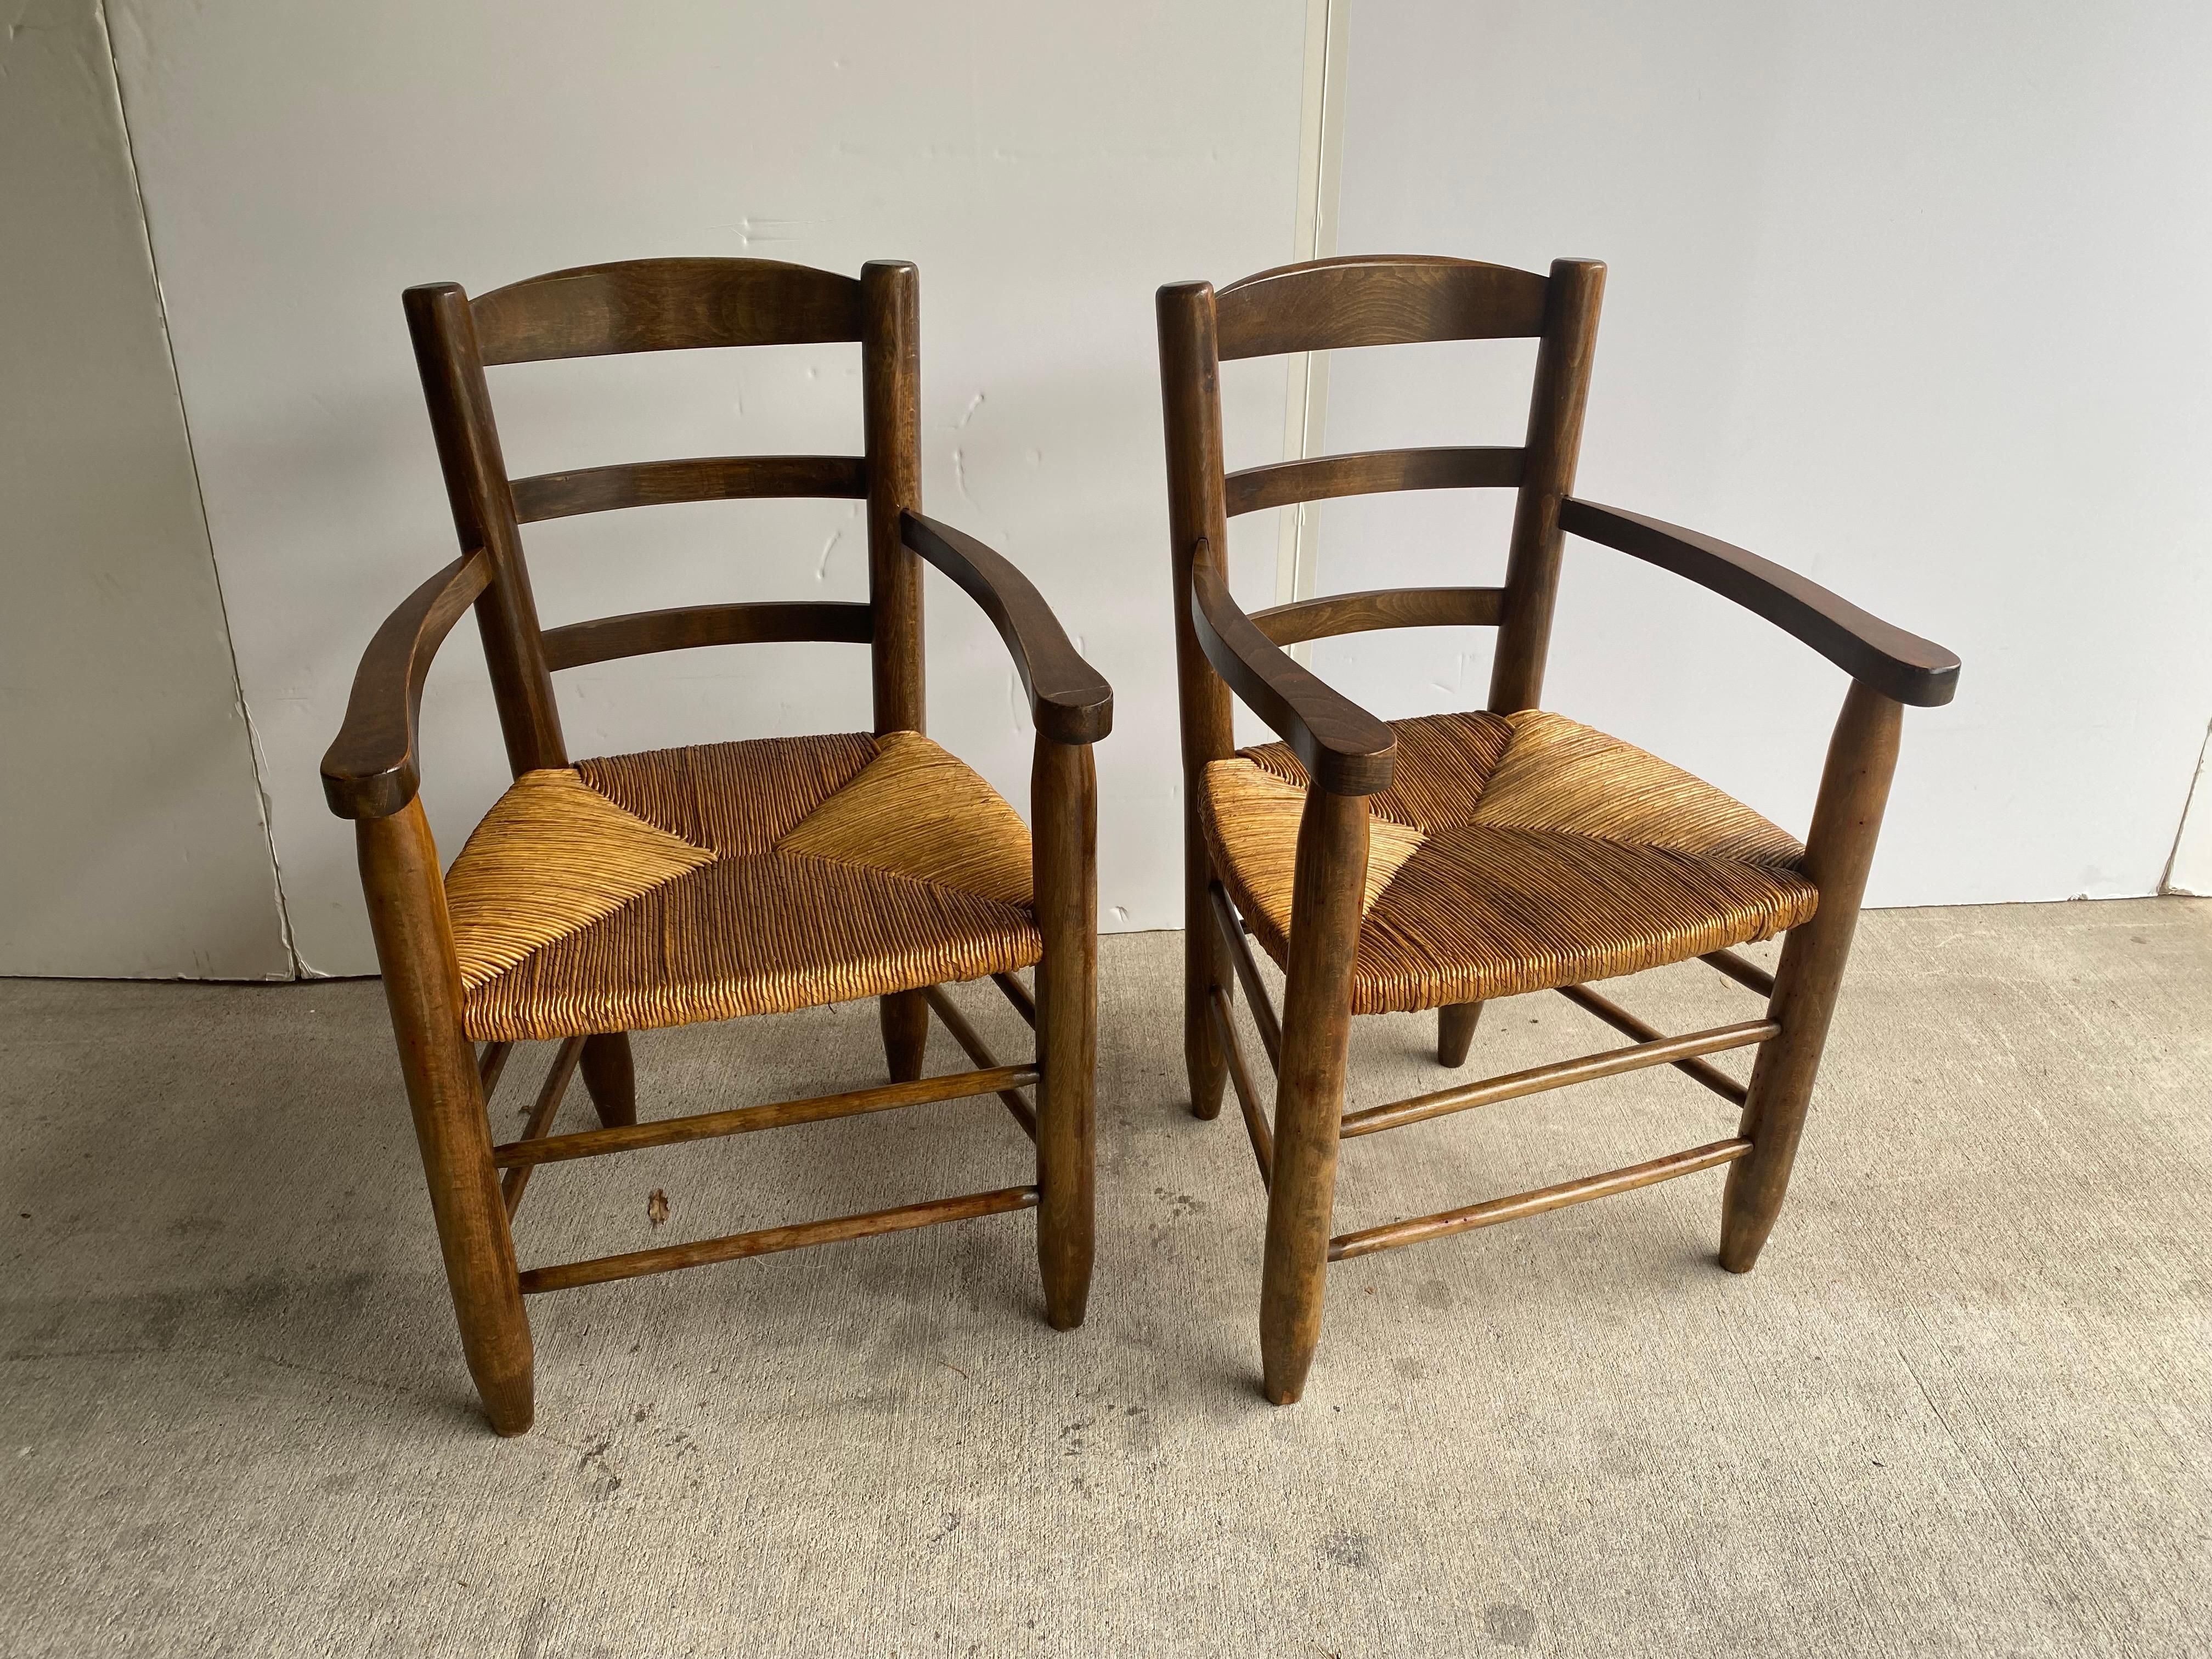 Pair of comfortable armchairs in beech or oak with woven rush seats. Great side chairs or dining chairs. In the style typical of chalet and chateau residences from mid-century France. France, 1950's.